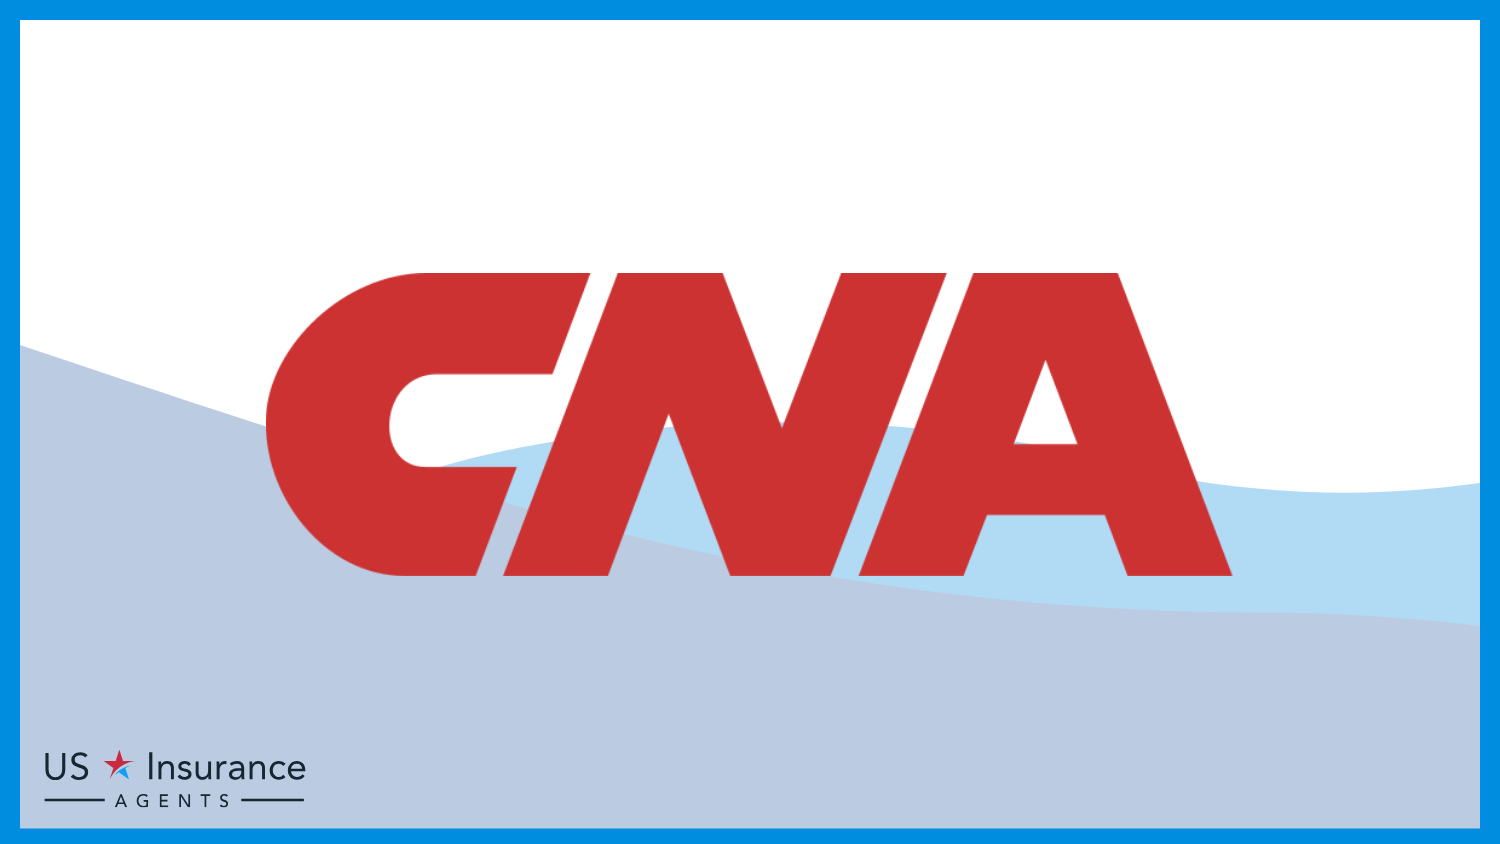 CNA: Best Business Insurance for Schools and Educational Institutions